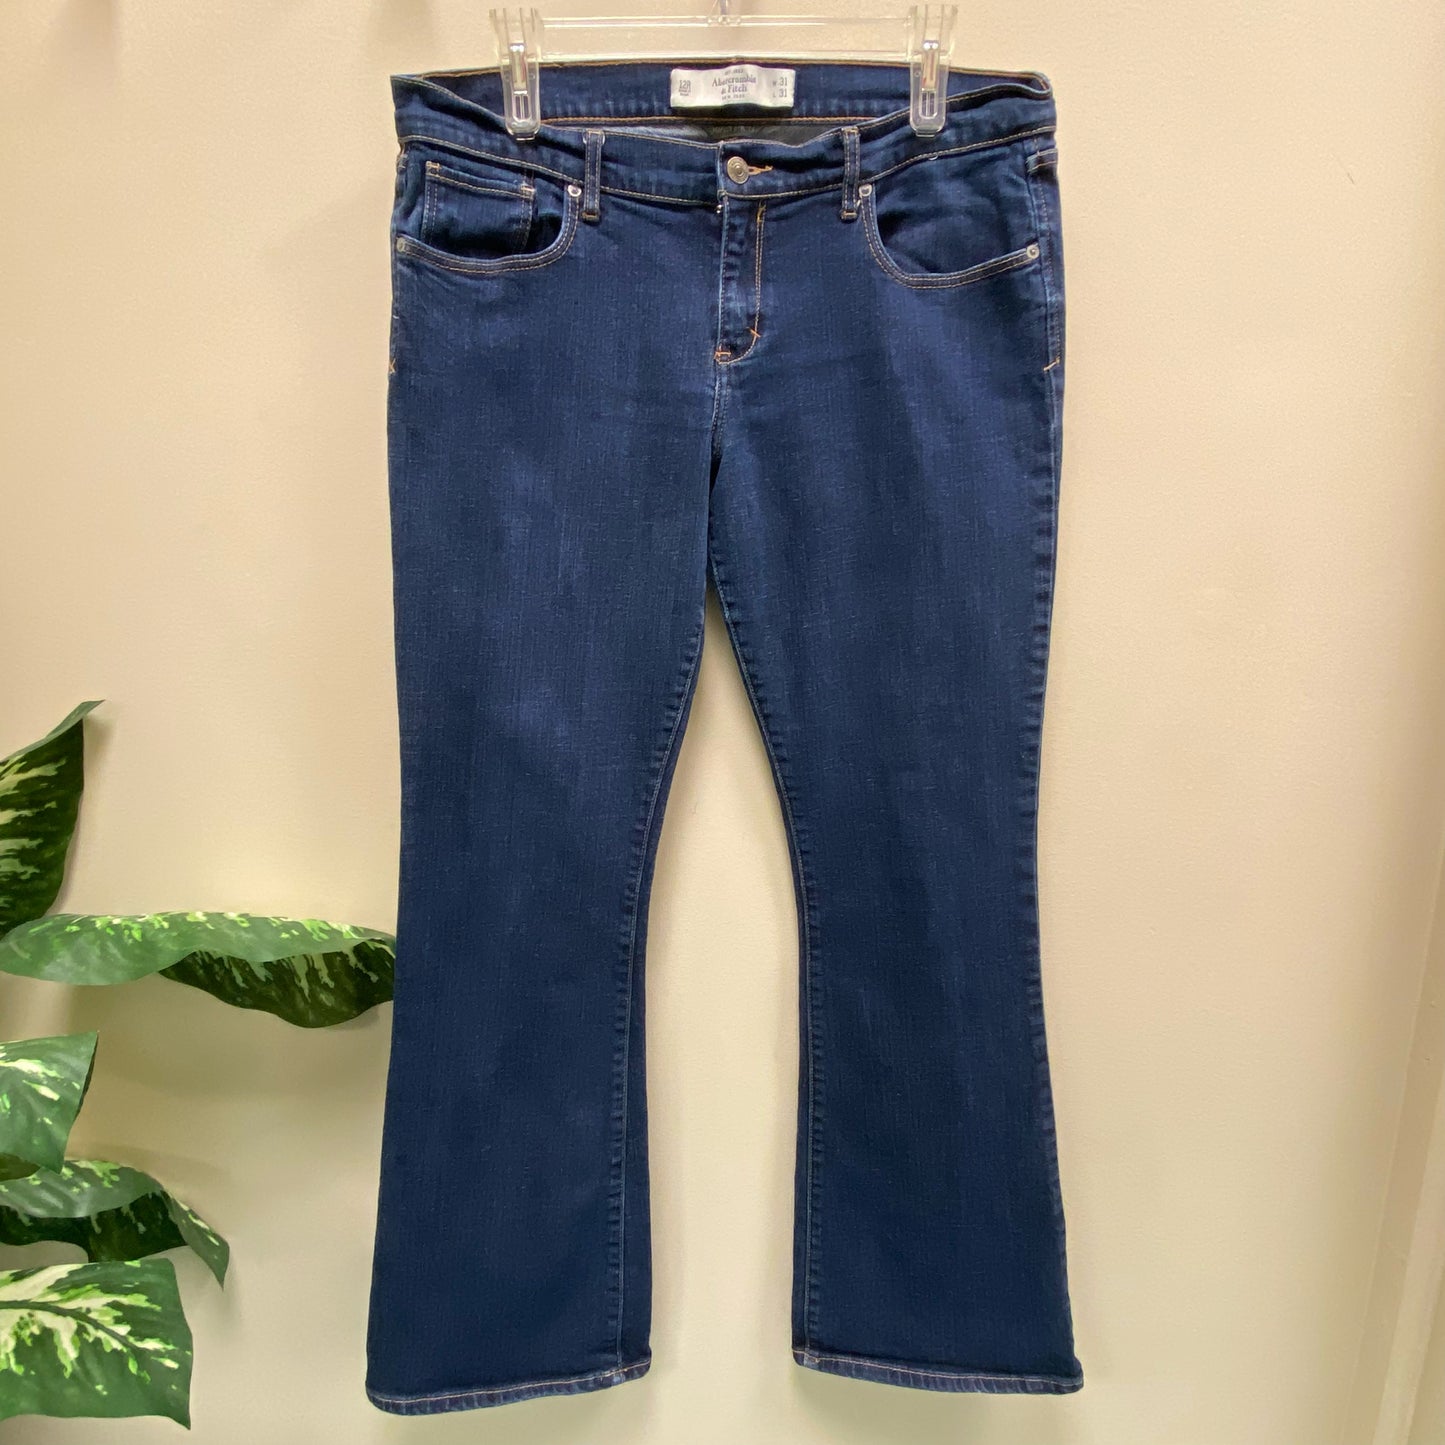 Abercrombie & Fitch "Madison" Jeans - Size 12